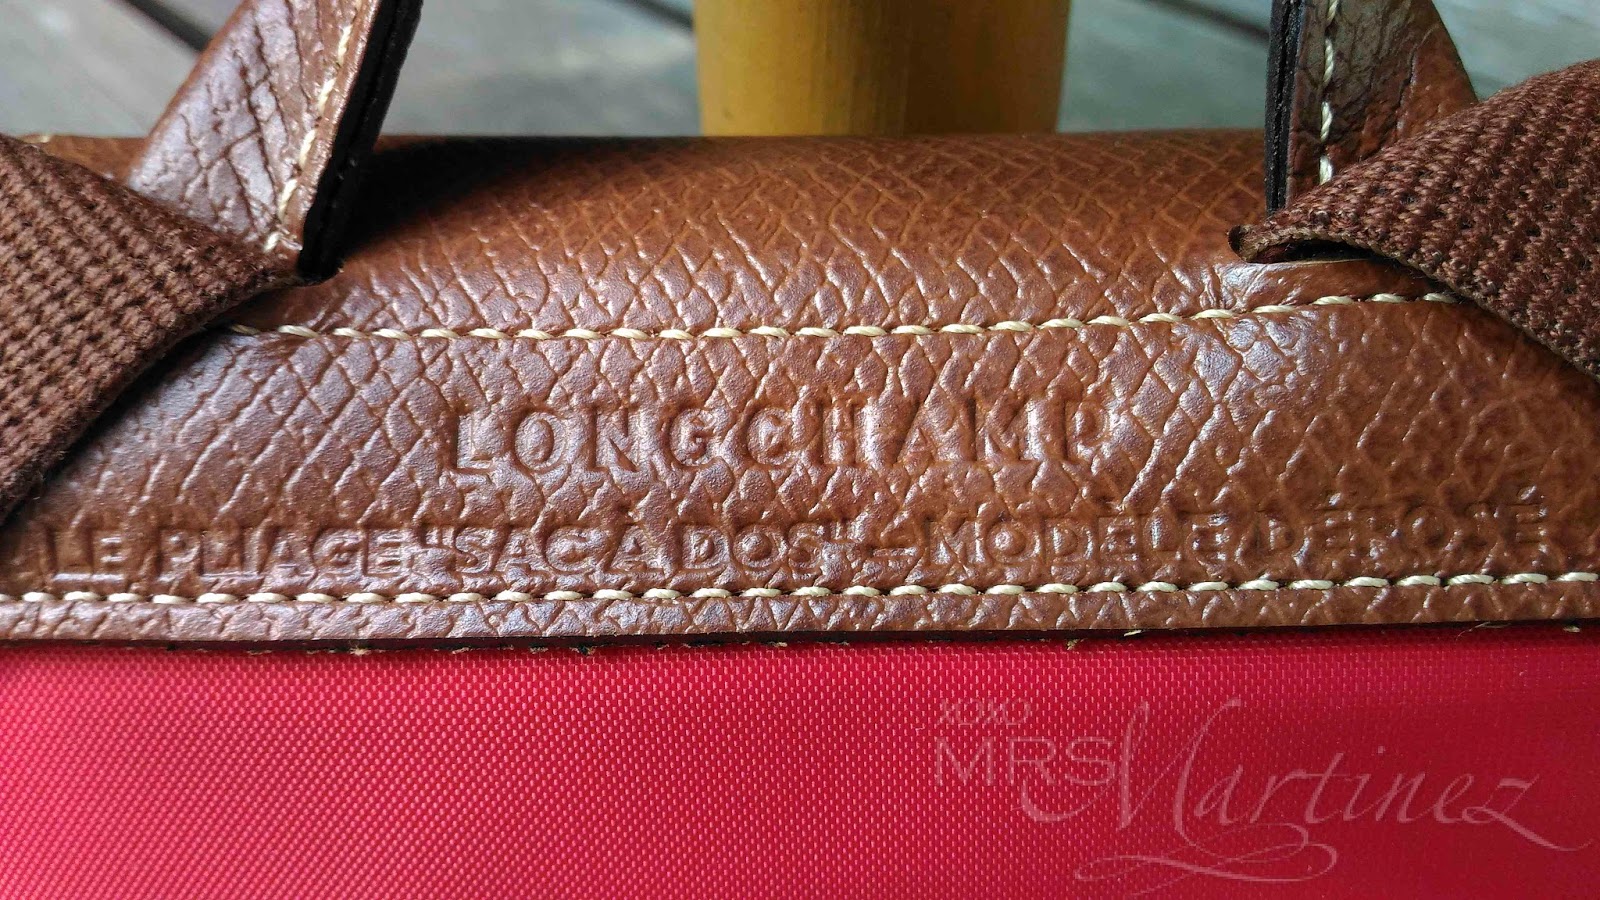 how to tell if a longchamp bag is real